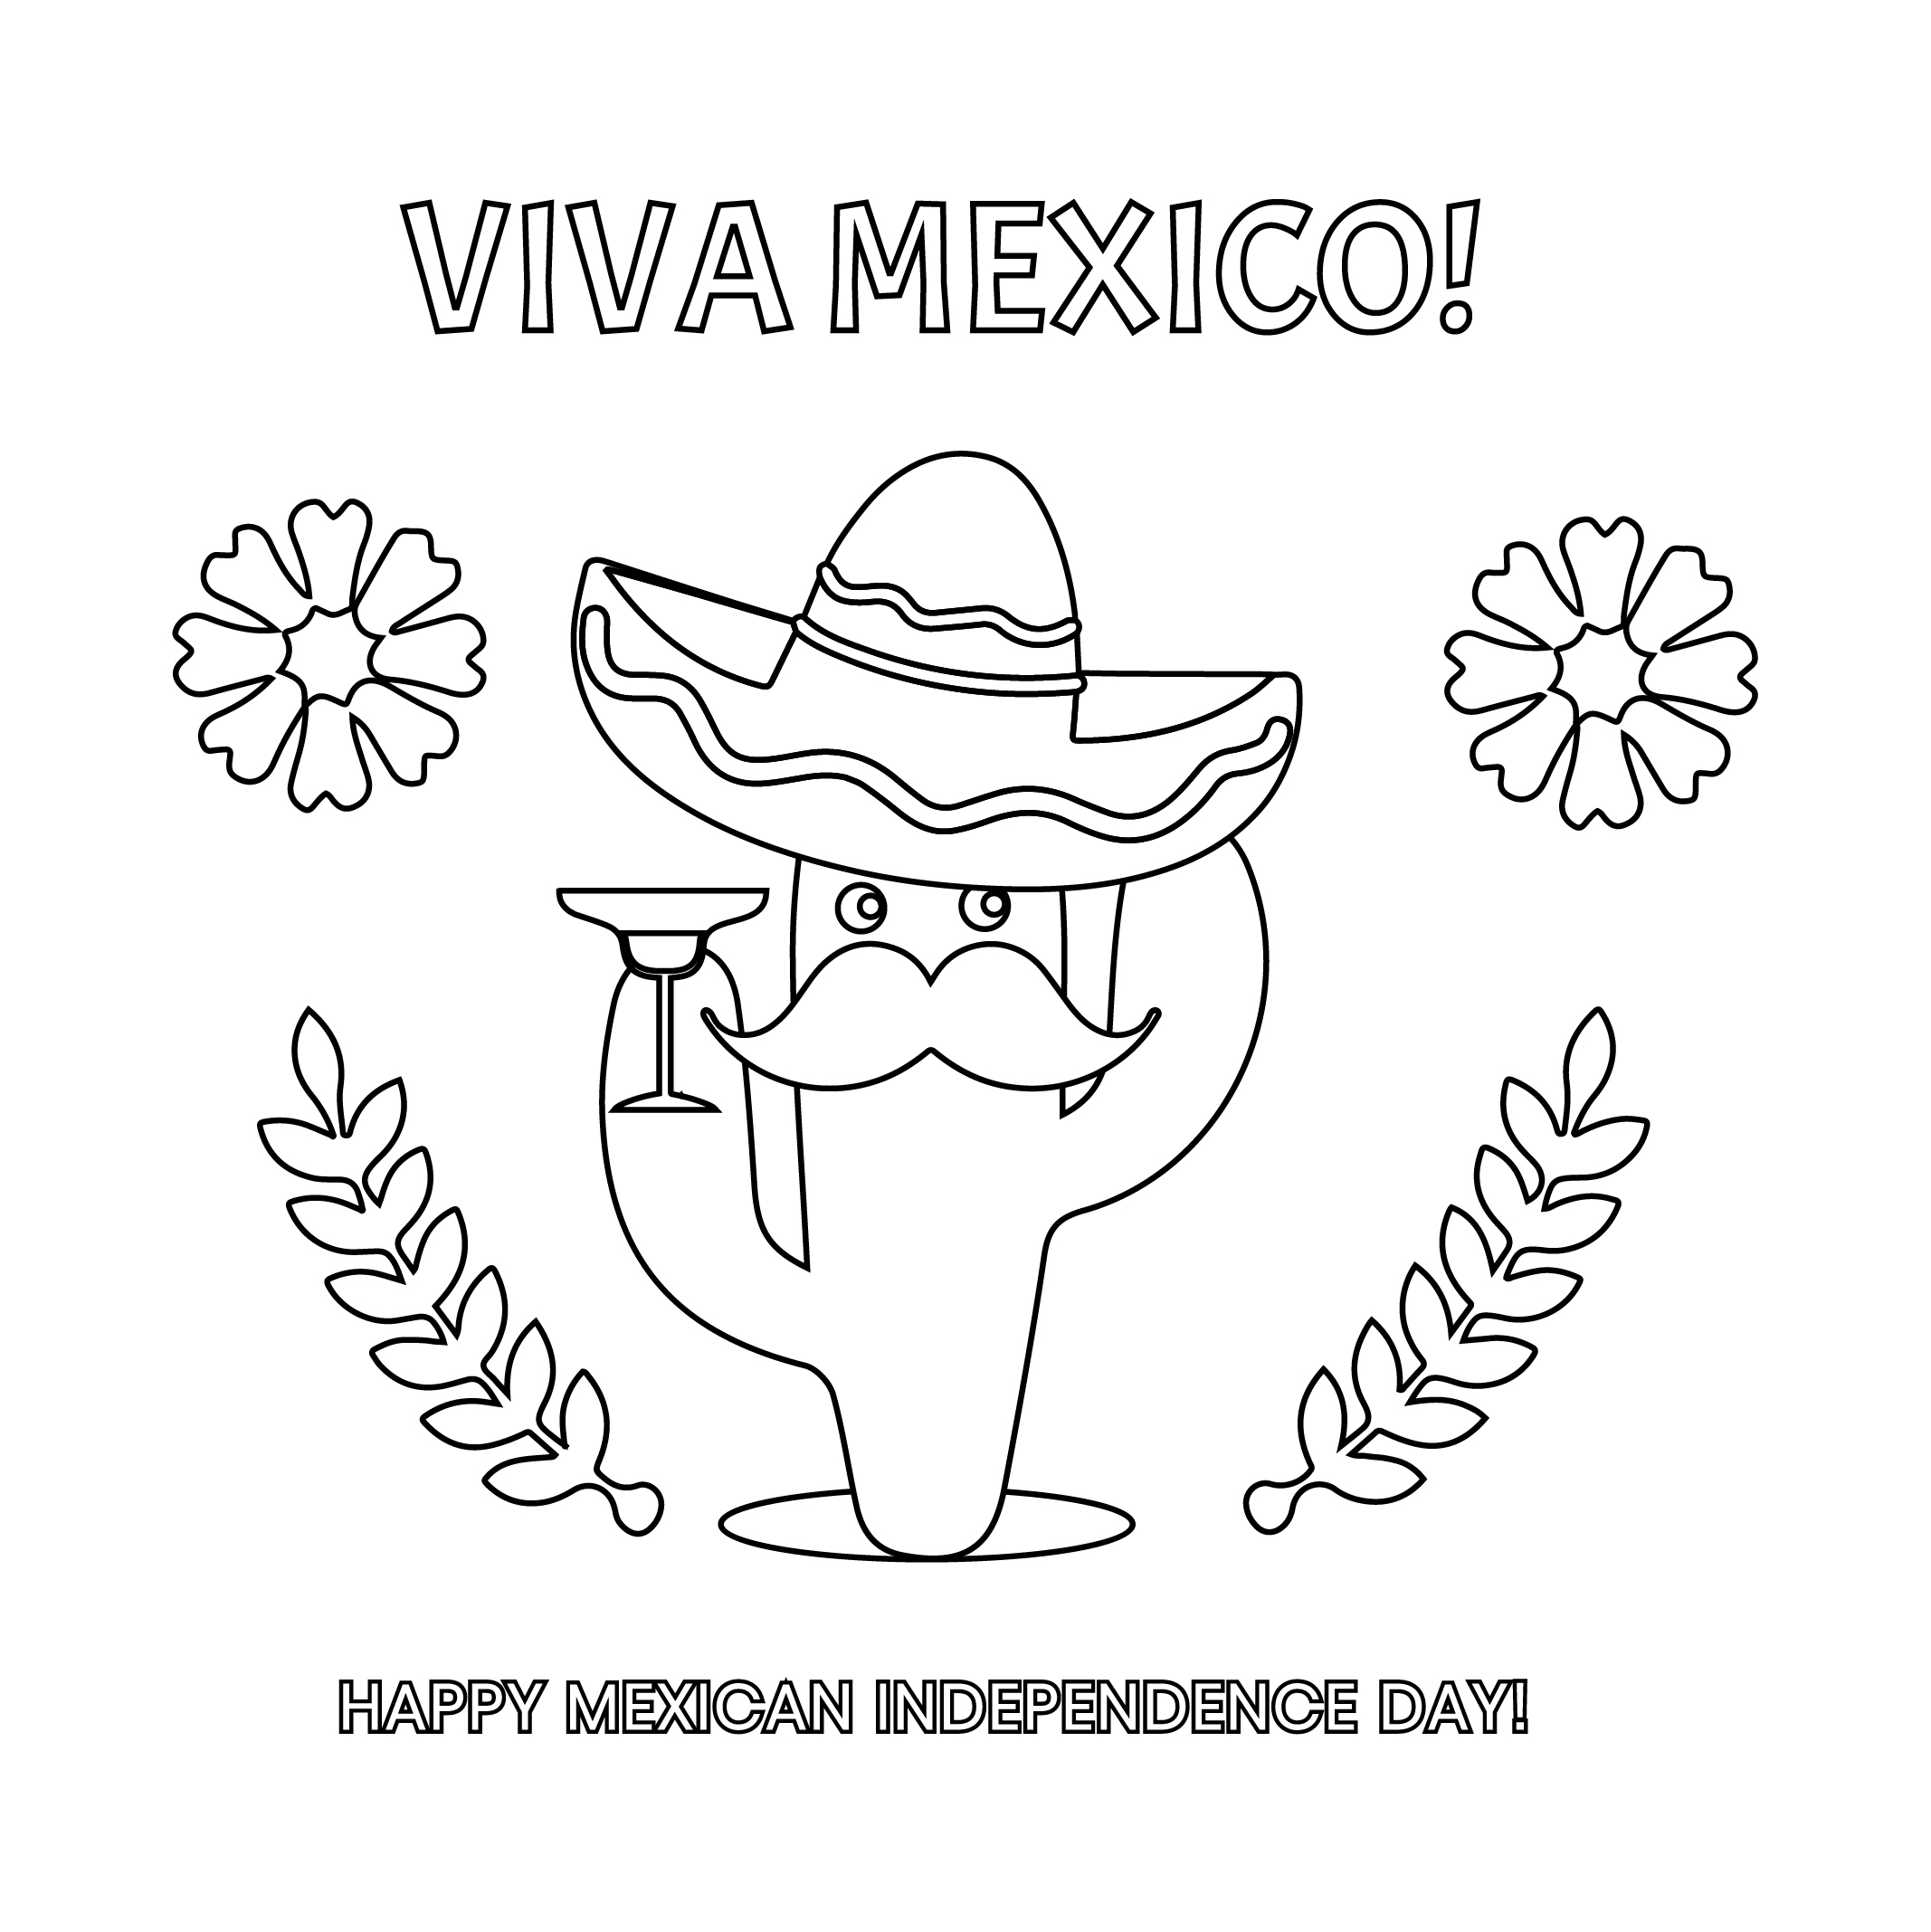 FREE Mexican Independence Day Drawing Image Download in Illustrator